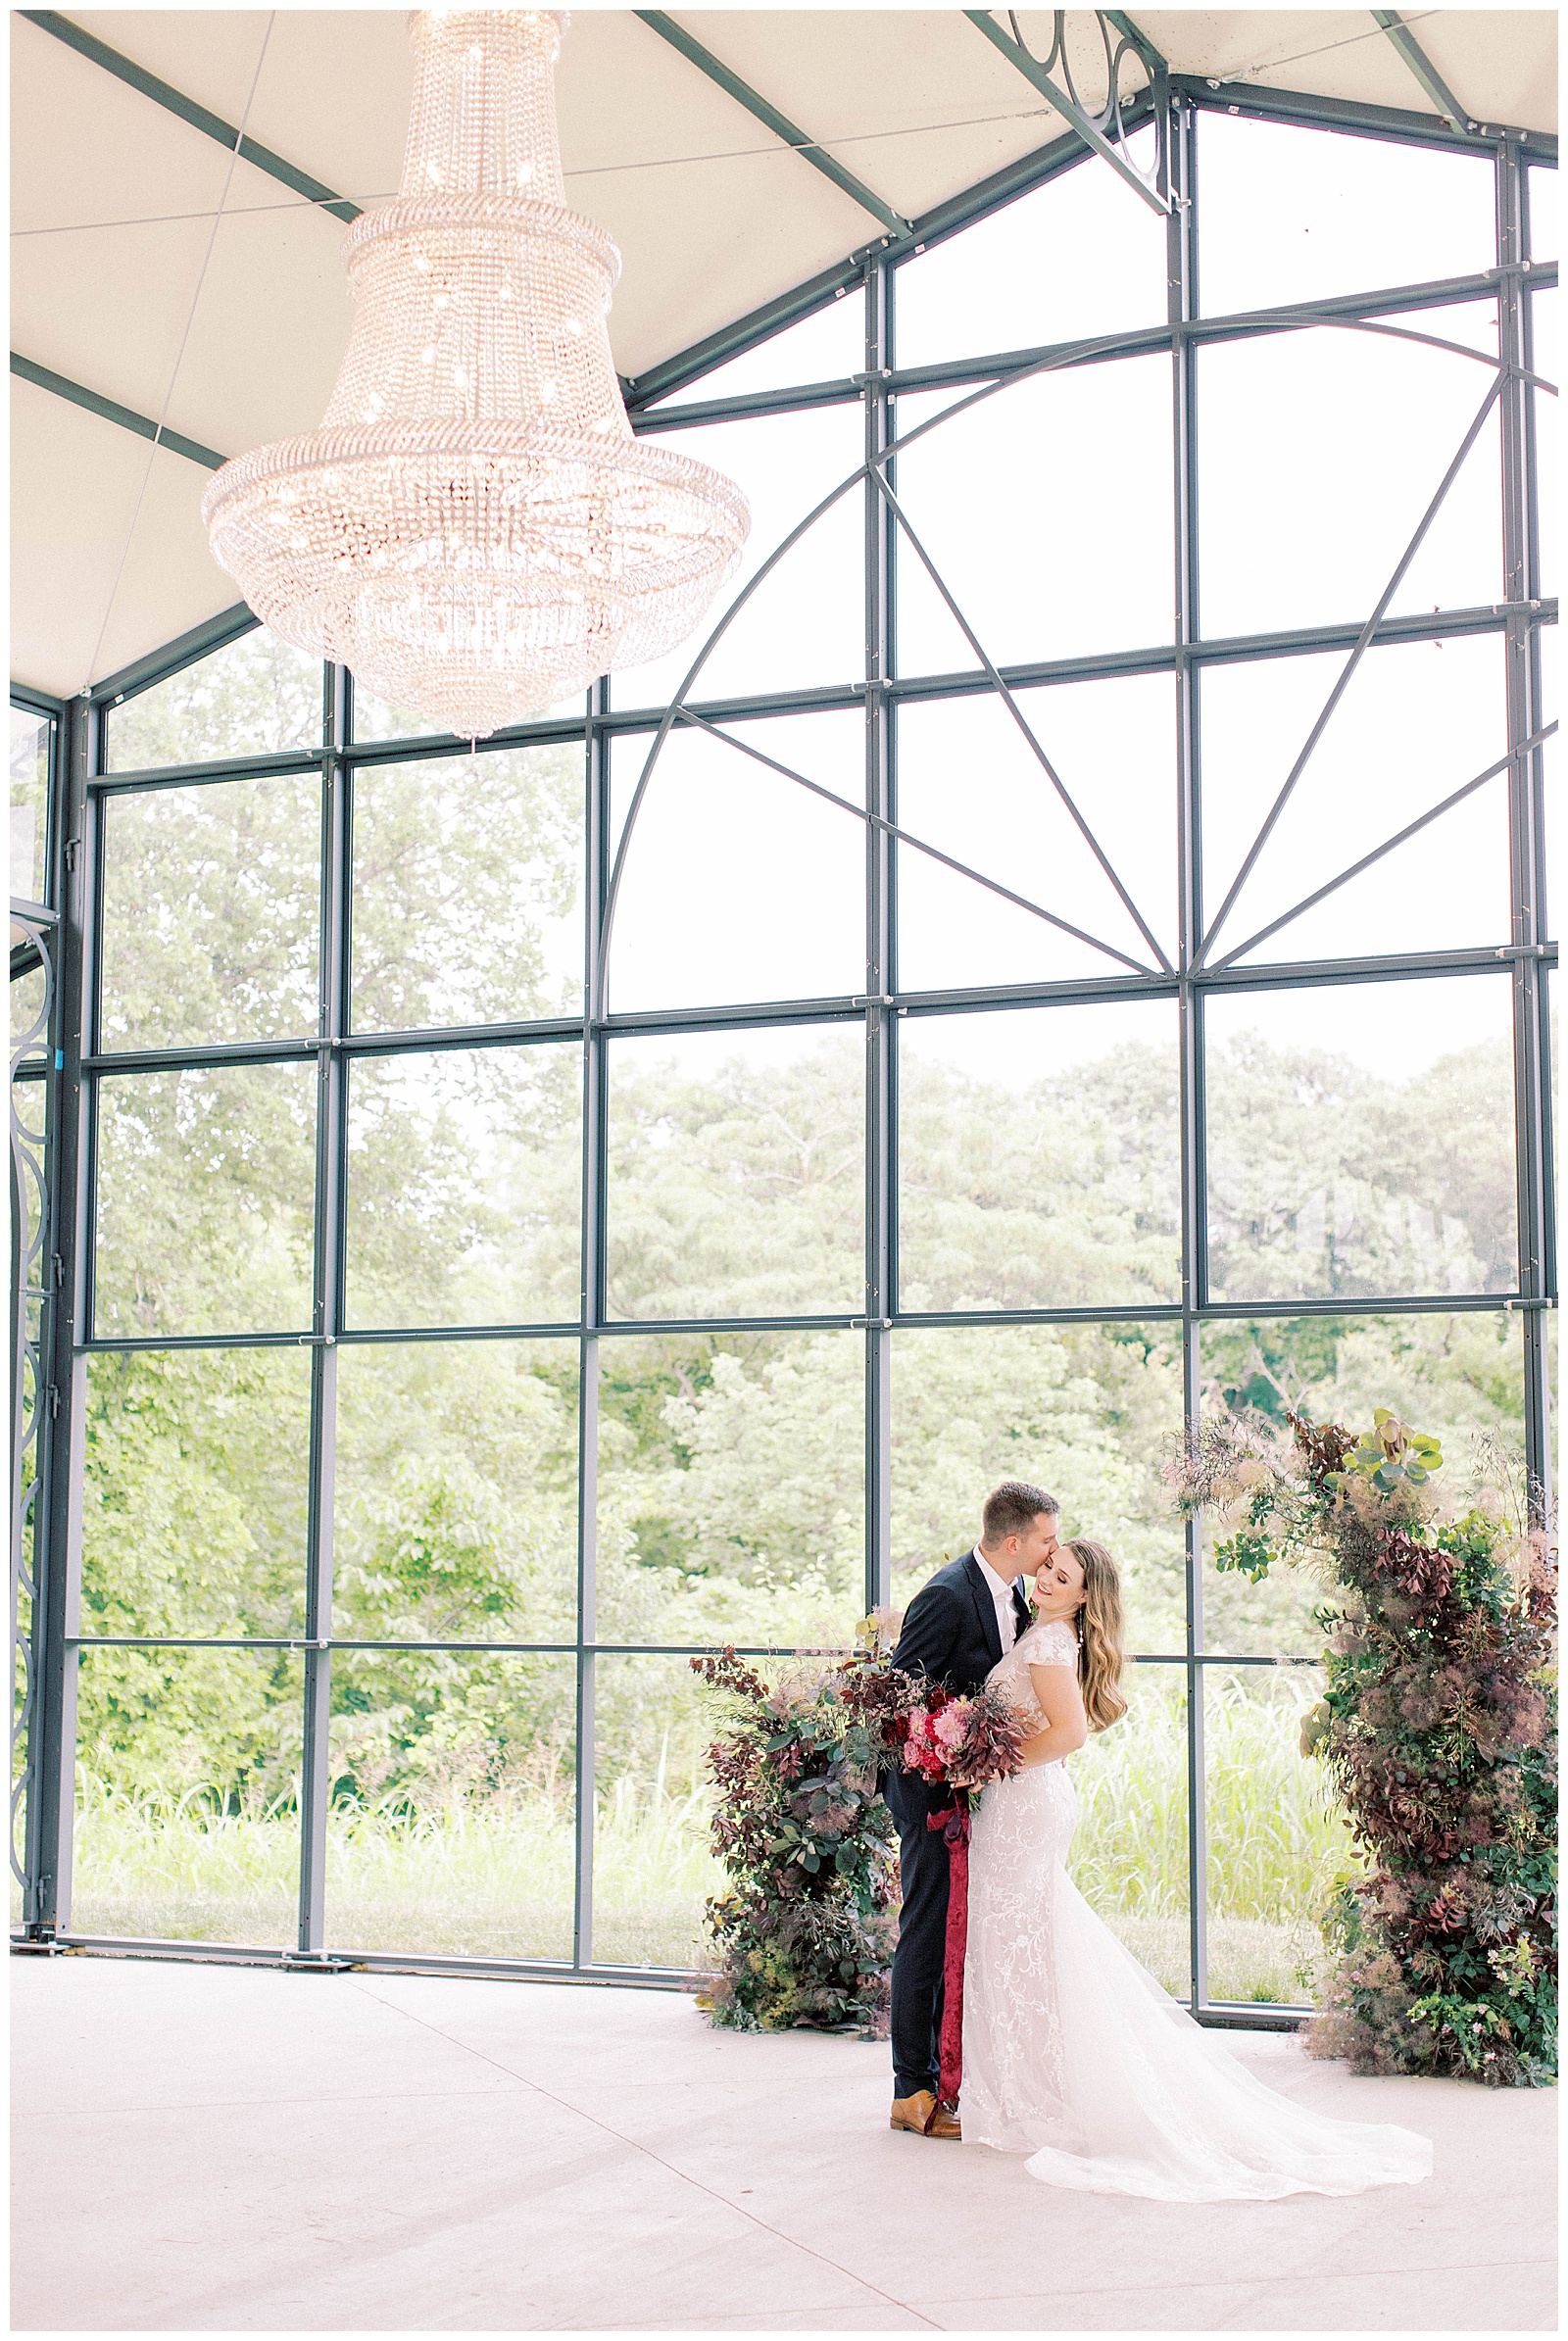 Beautiful chandelier with bride and groom floral wedding altar A-Vent Space